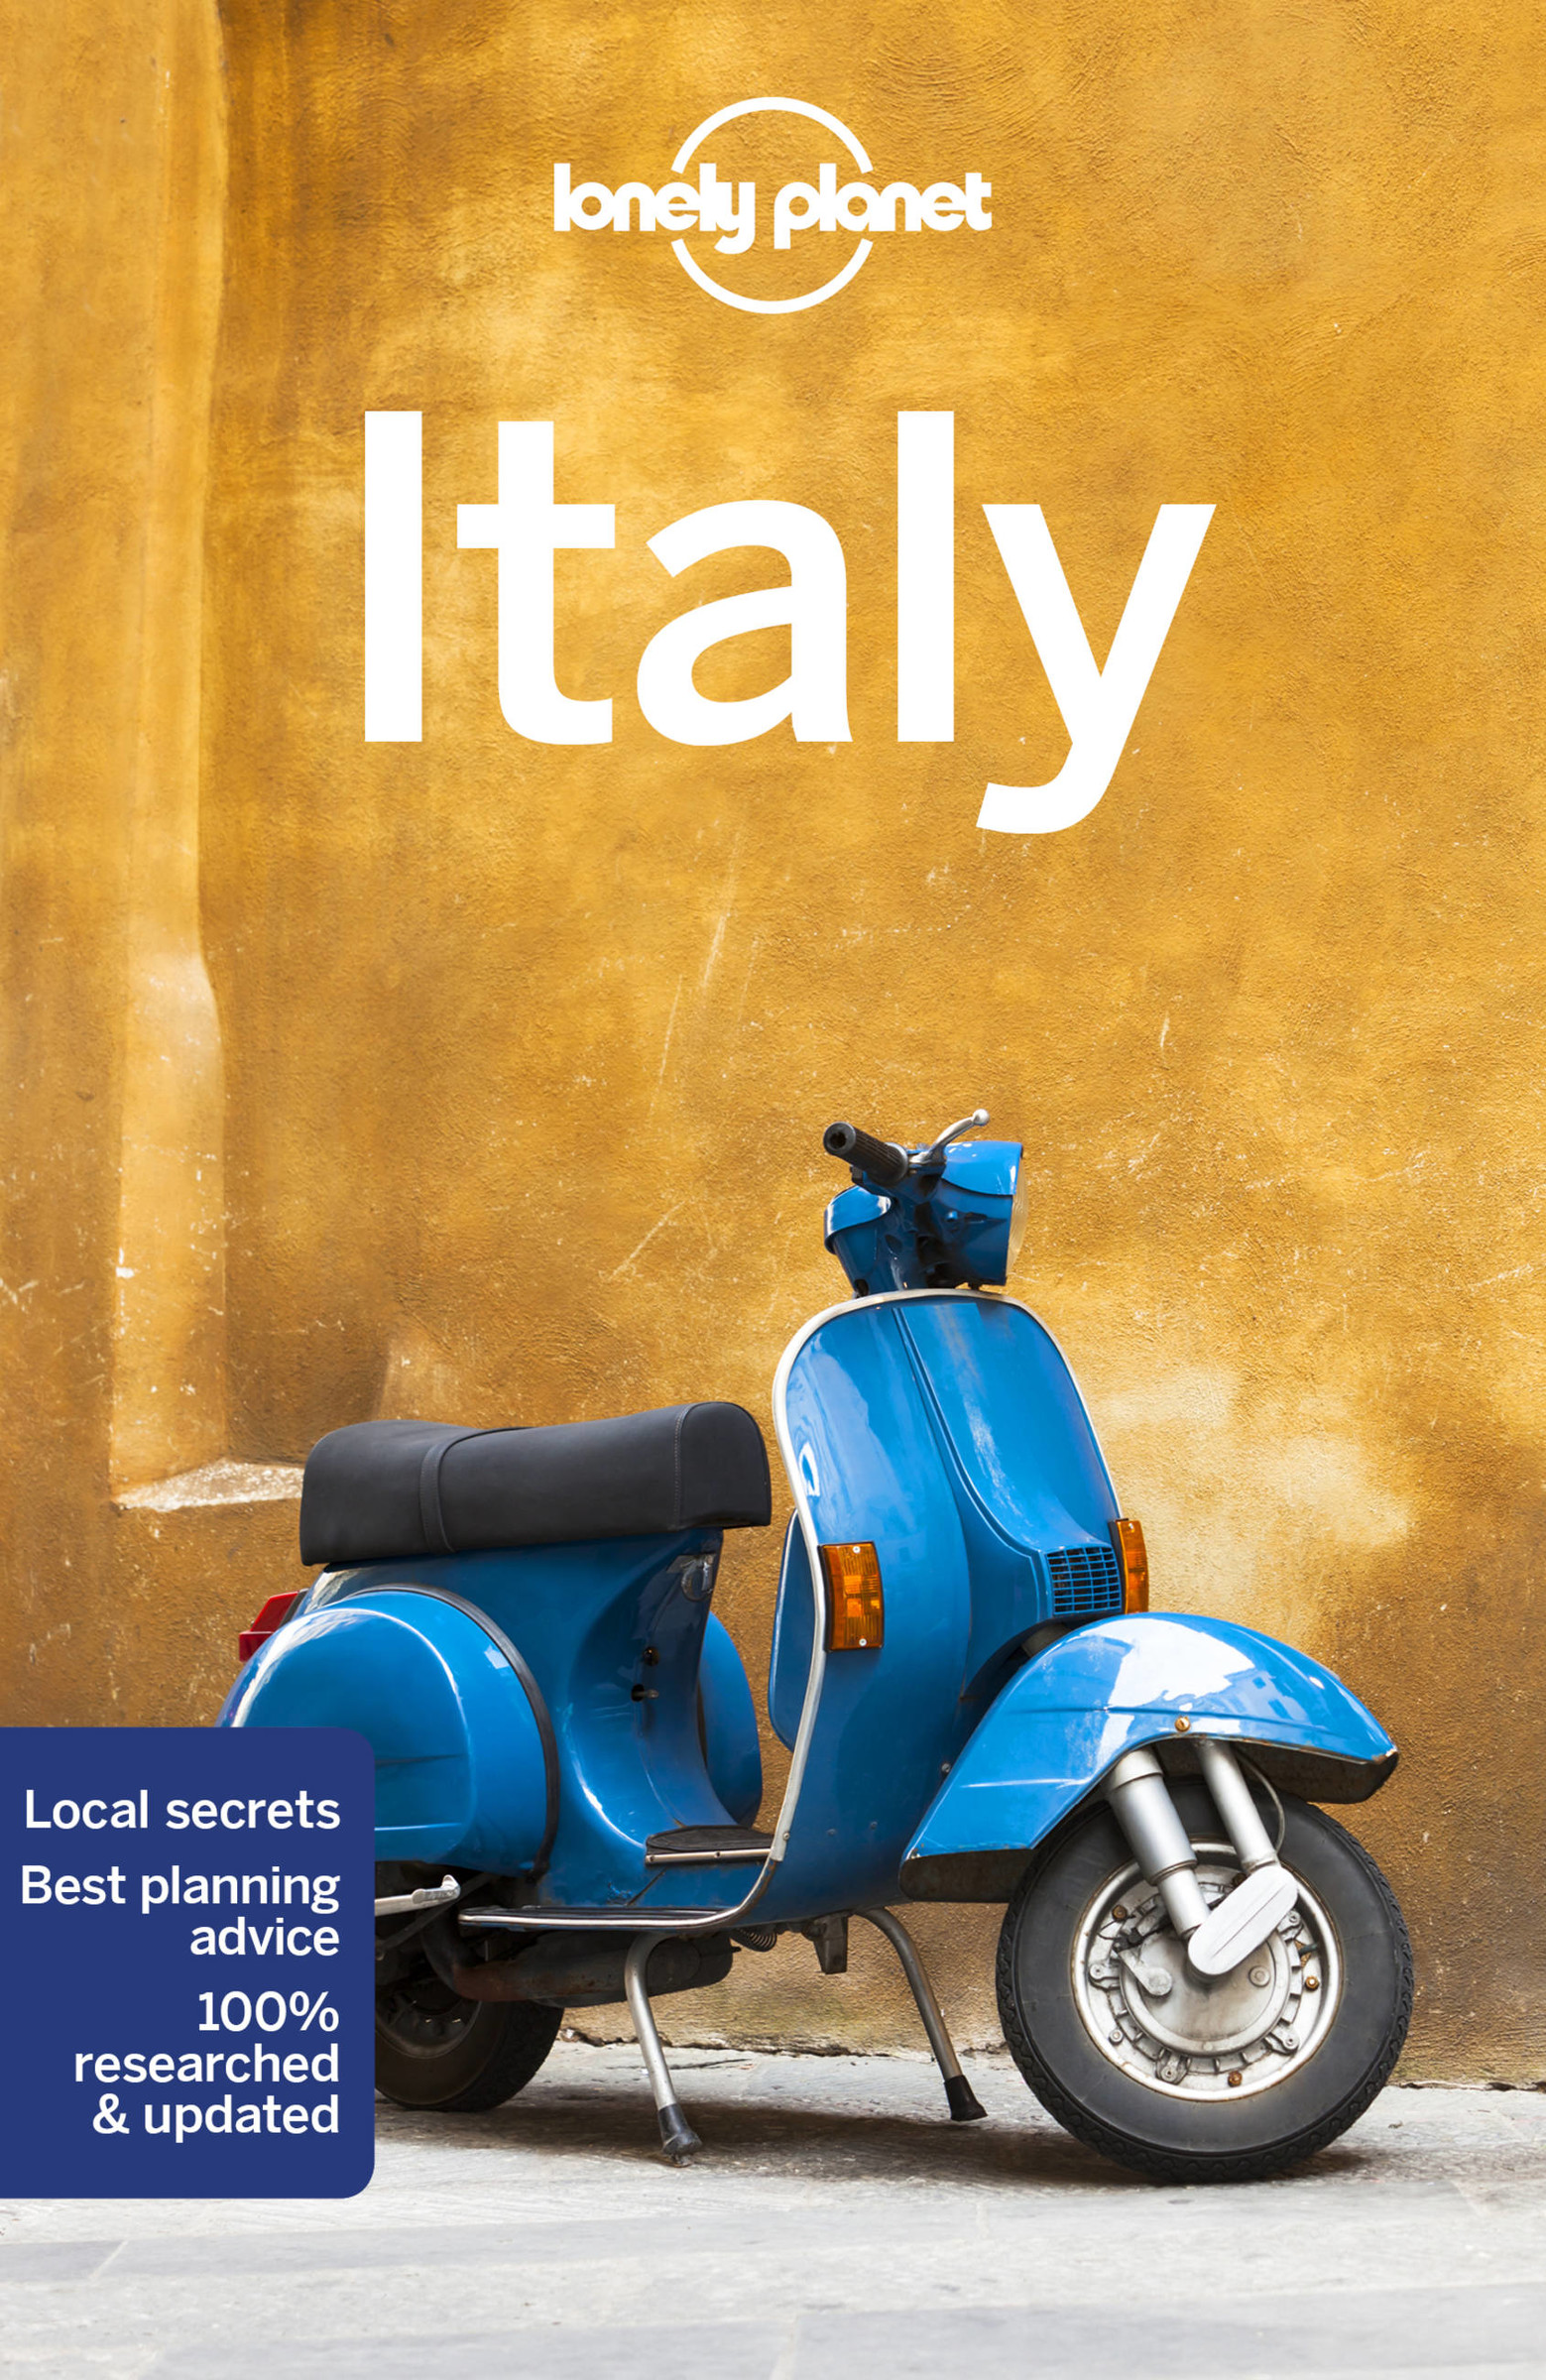 Lonely Planet Italy 15 15th Ed. | Bonetto, Cristian